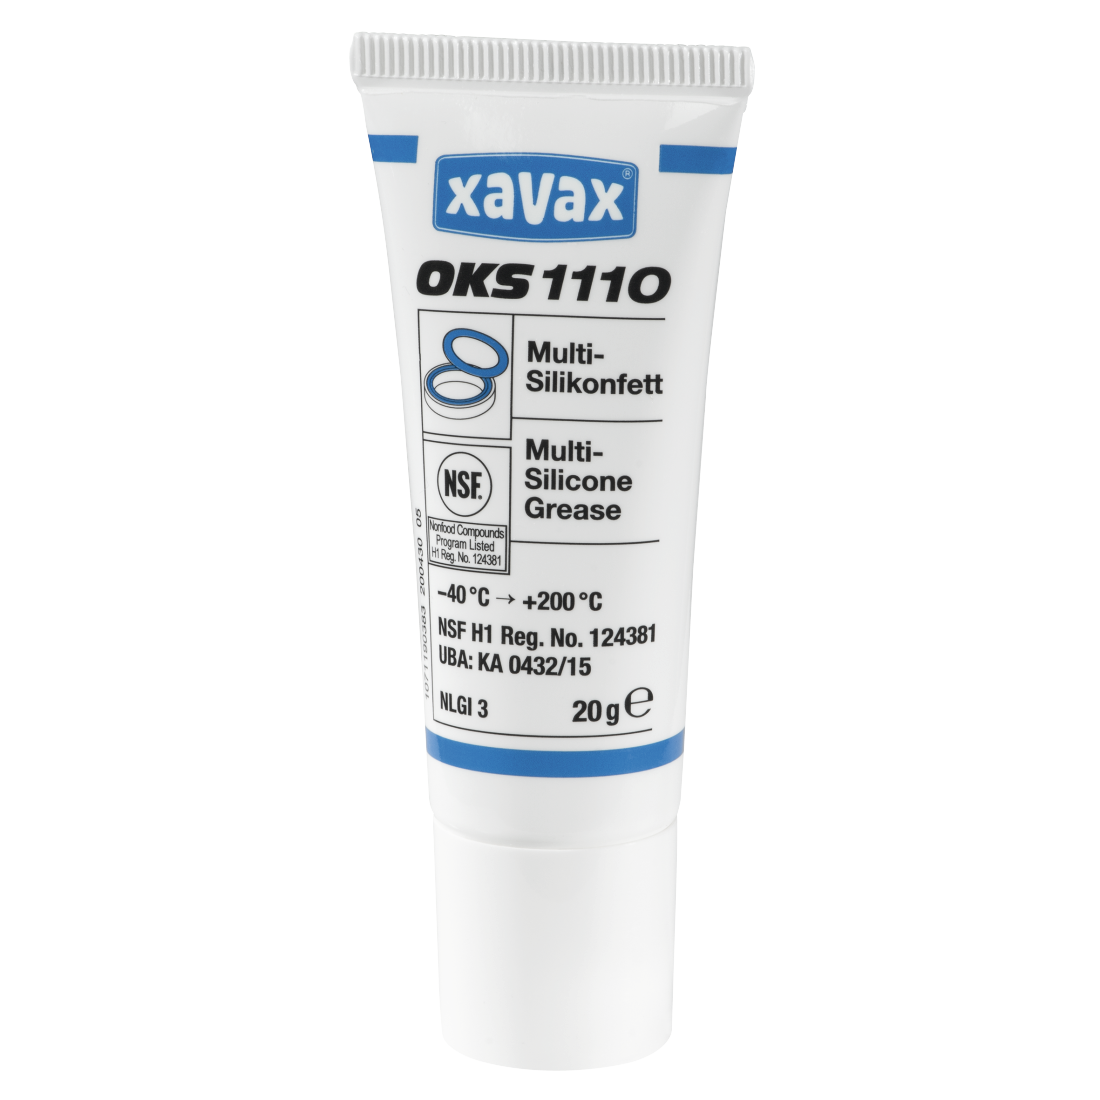 abx High-Res Image - Xavax, OKS 1110 Multi-Purpose Silicone Grease, 20 g